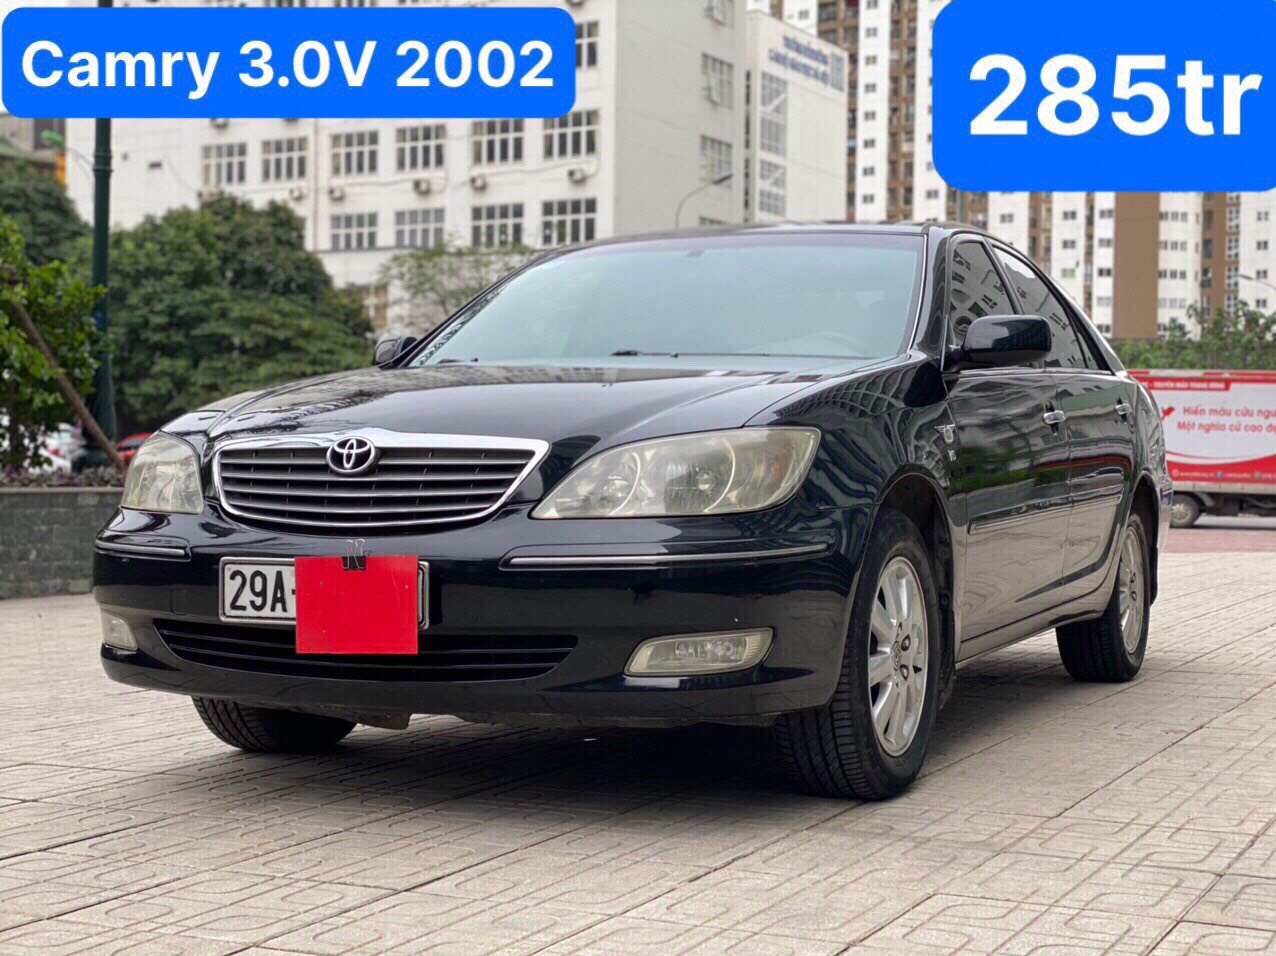 2002 Toyota Camry Reviews Ratings Prices  Consumer Reports